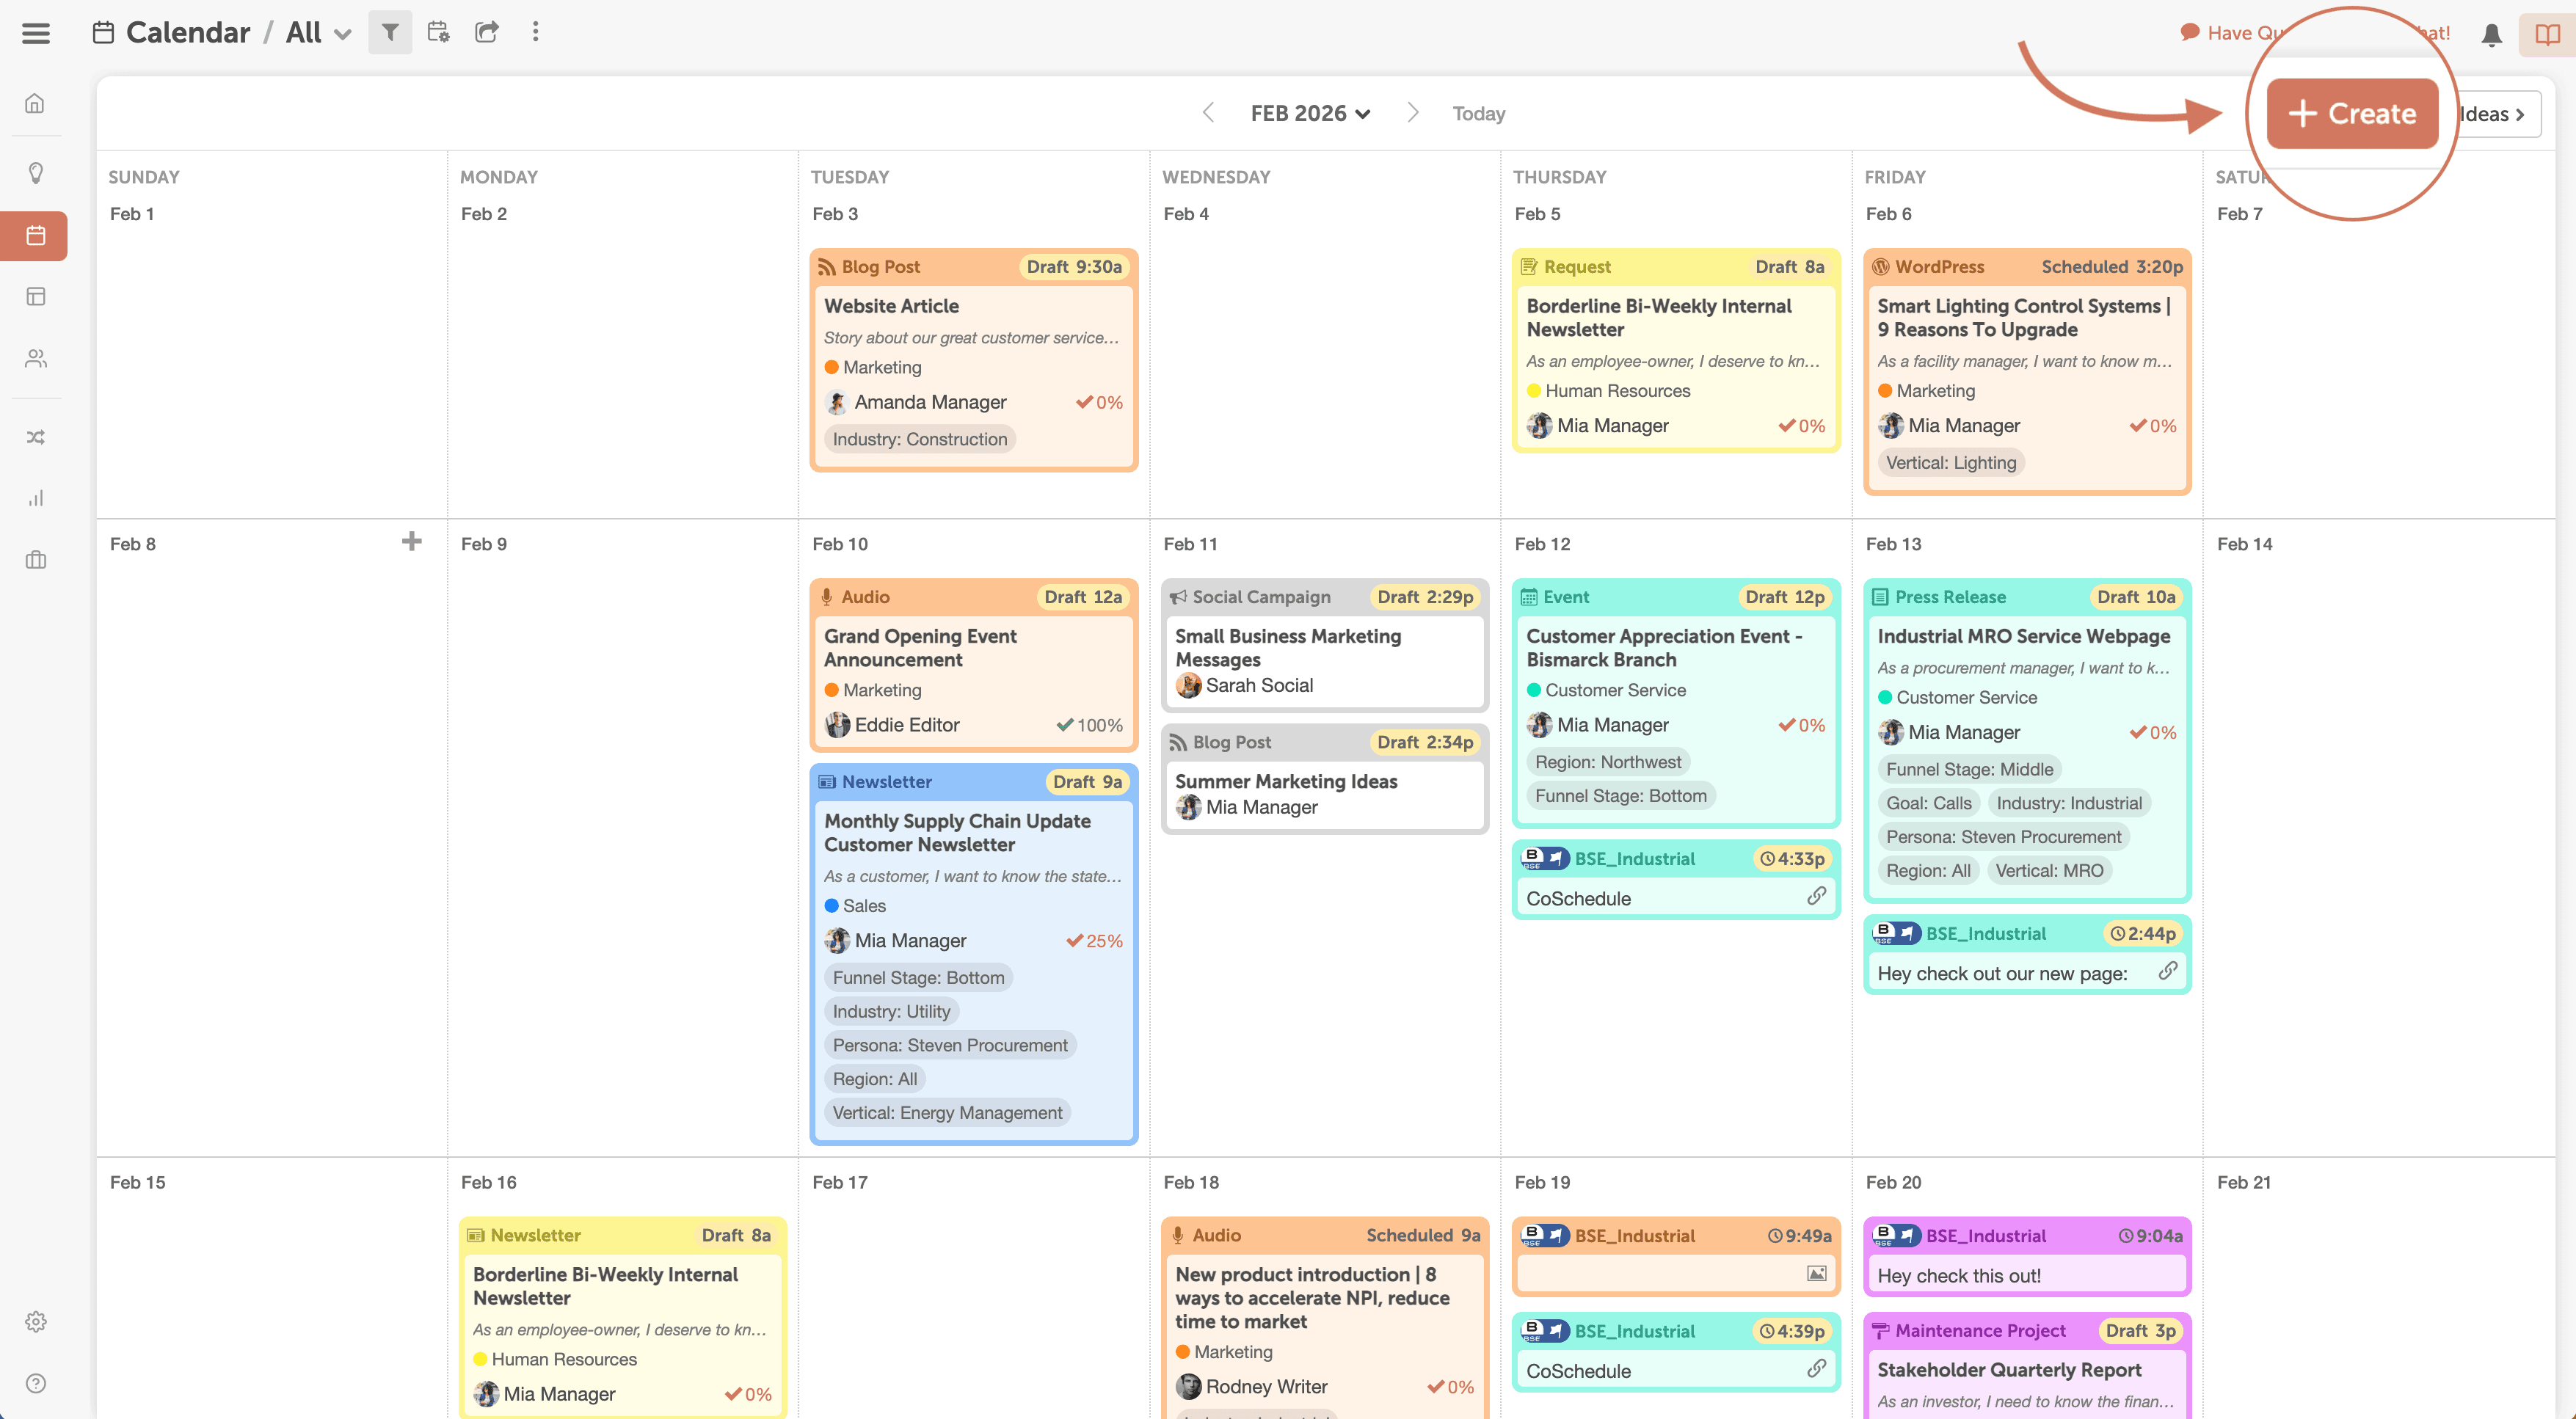 Add blog post project to CoSchedule Calendar.